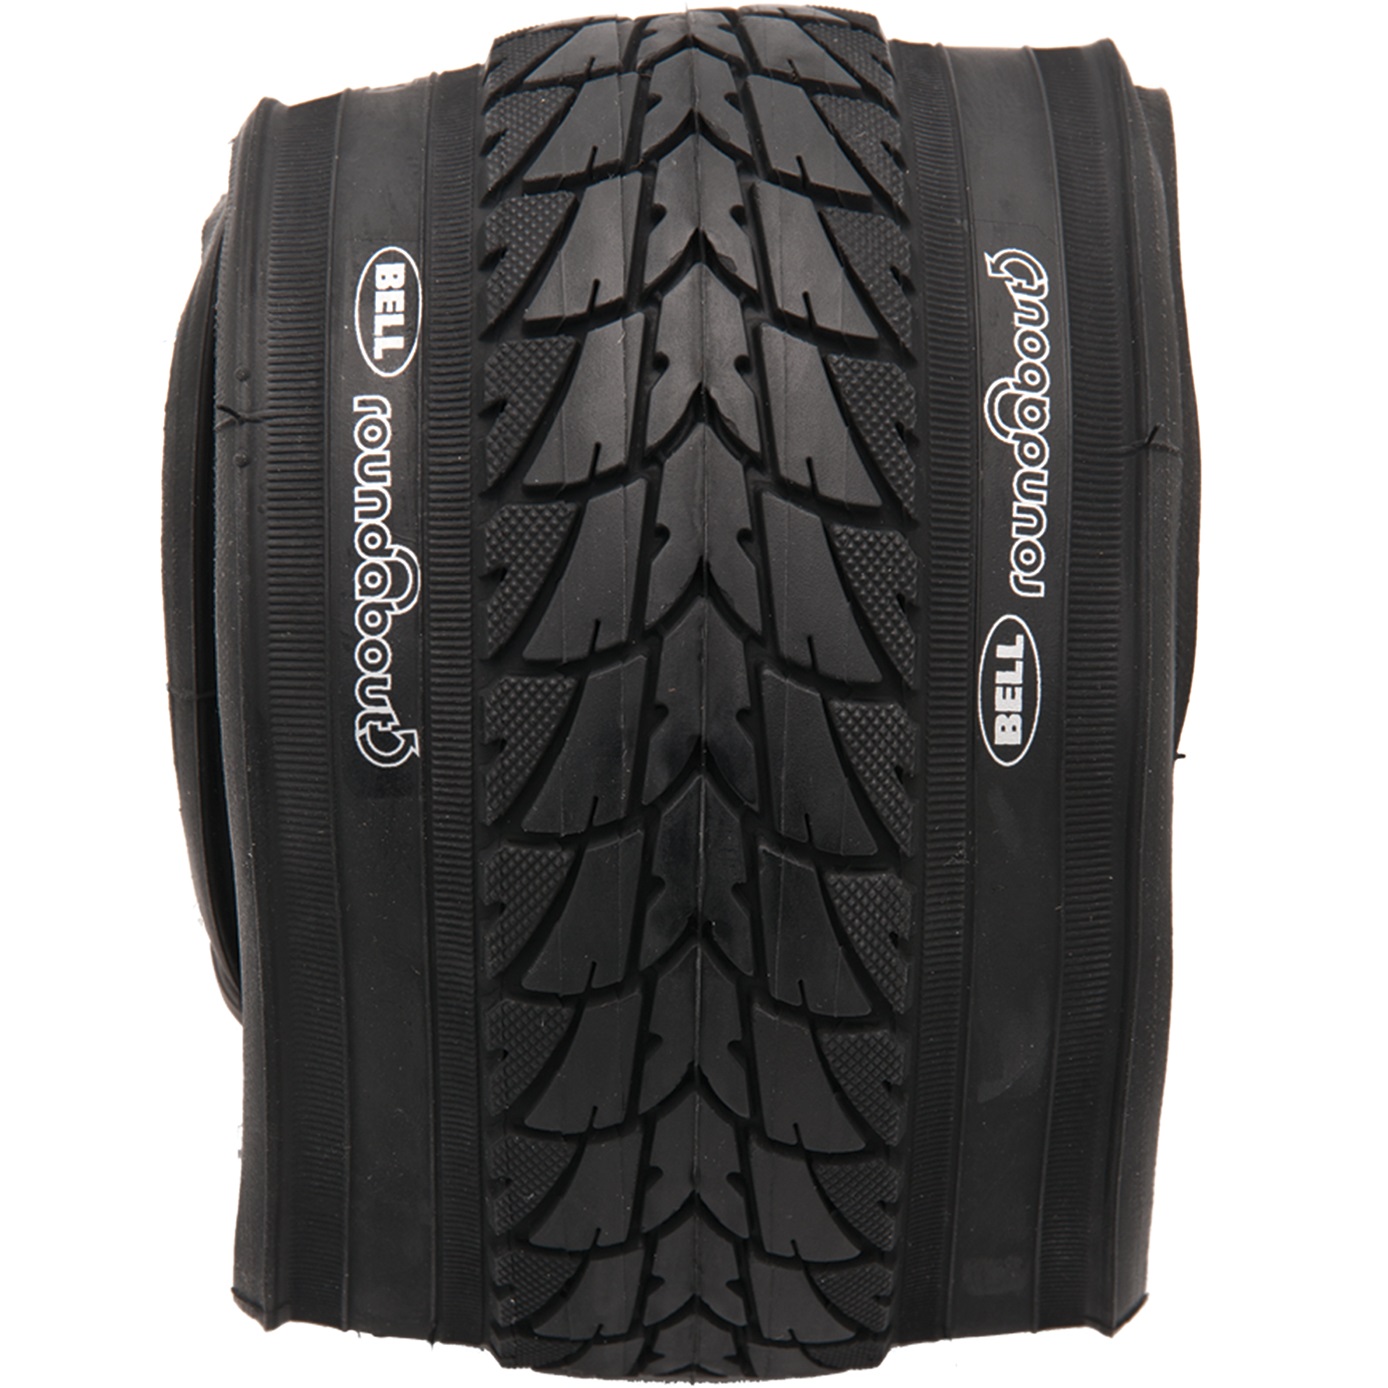 Bell Sports Comfort Roundabout Premium Commuter Tire, 26" x 1.75", Black - image 2 of 2